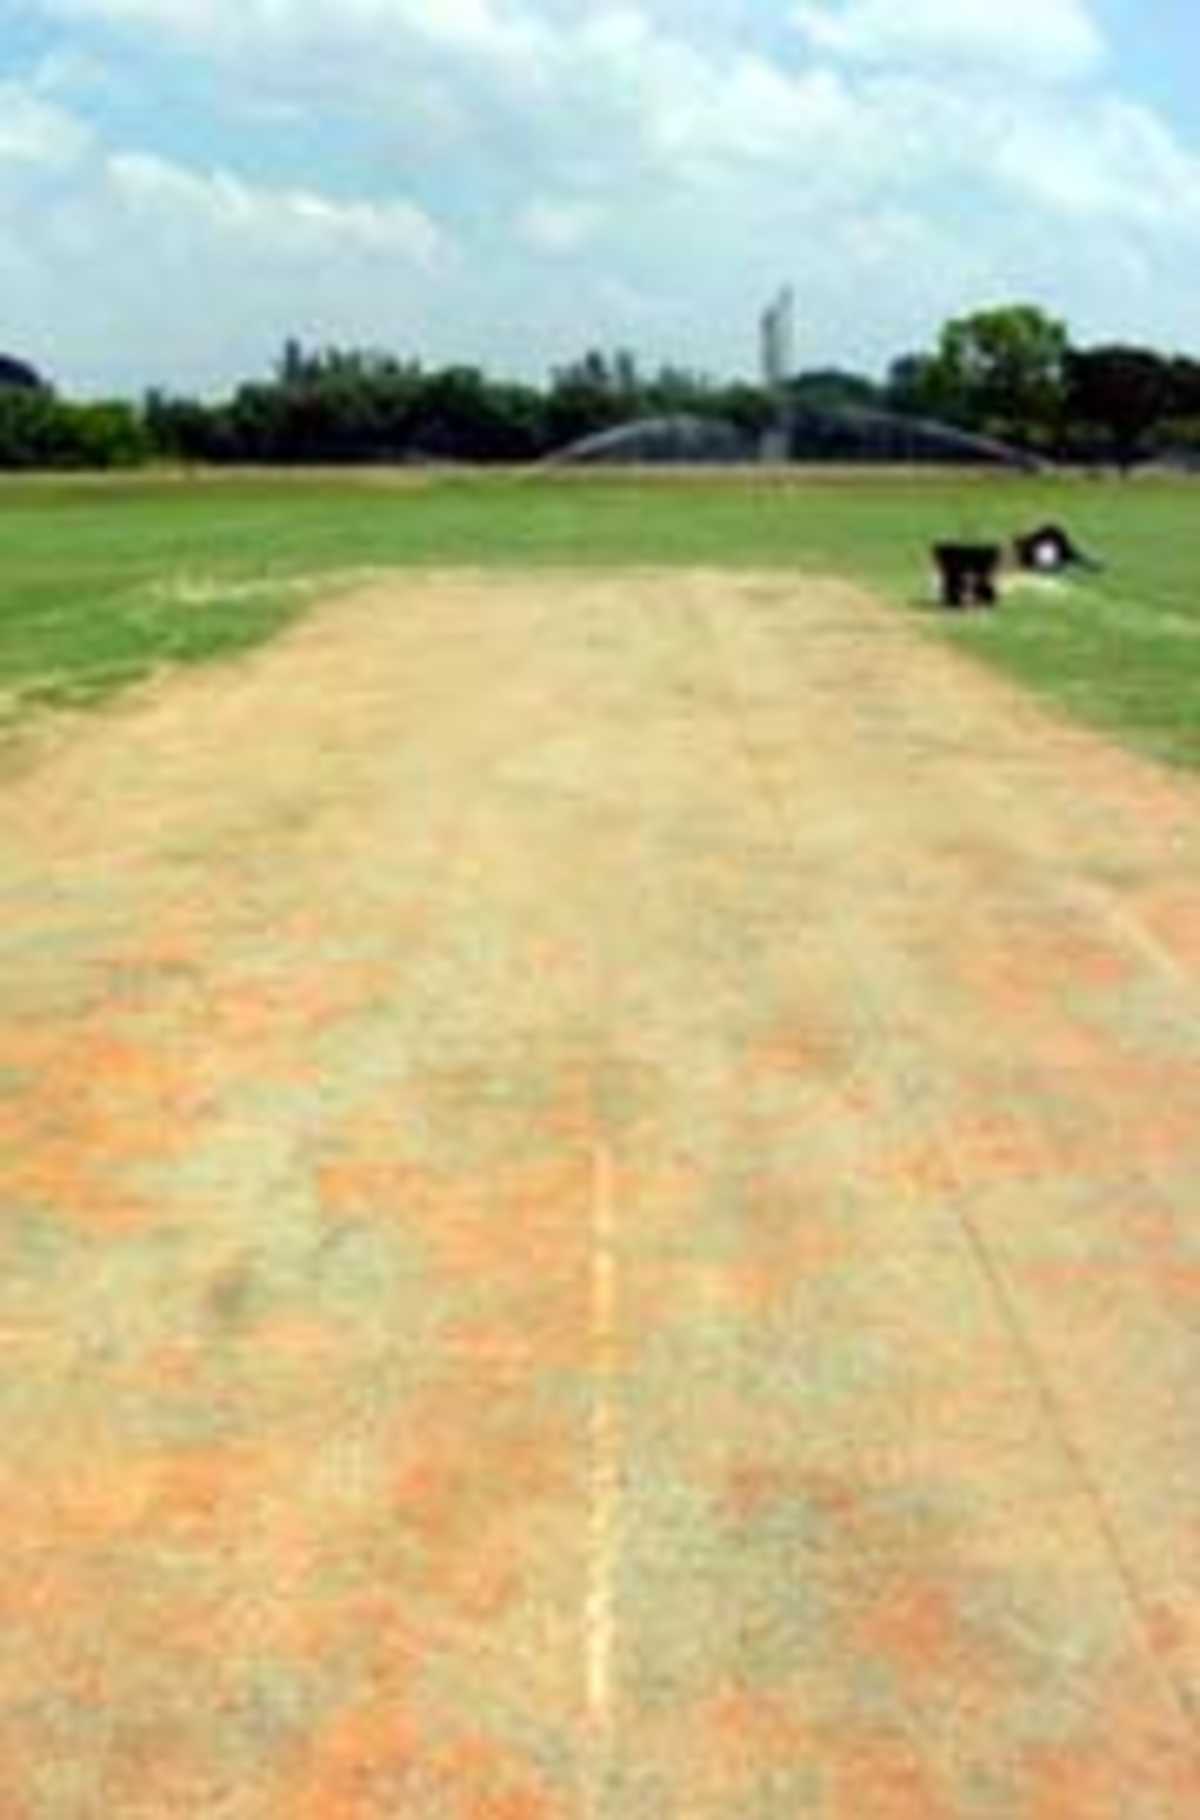 The new pitch at Brian Picollo Park, ICC Intercontinental Cup, May 2004